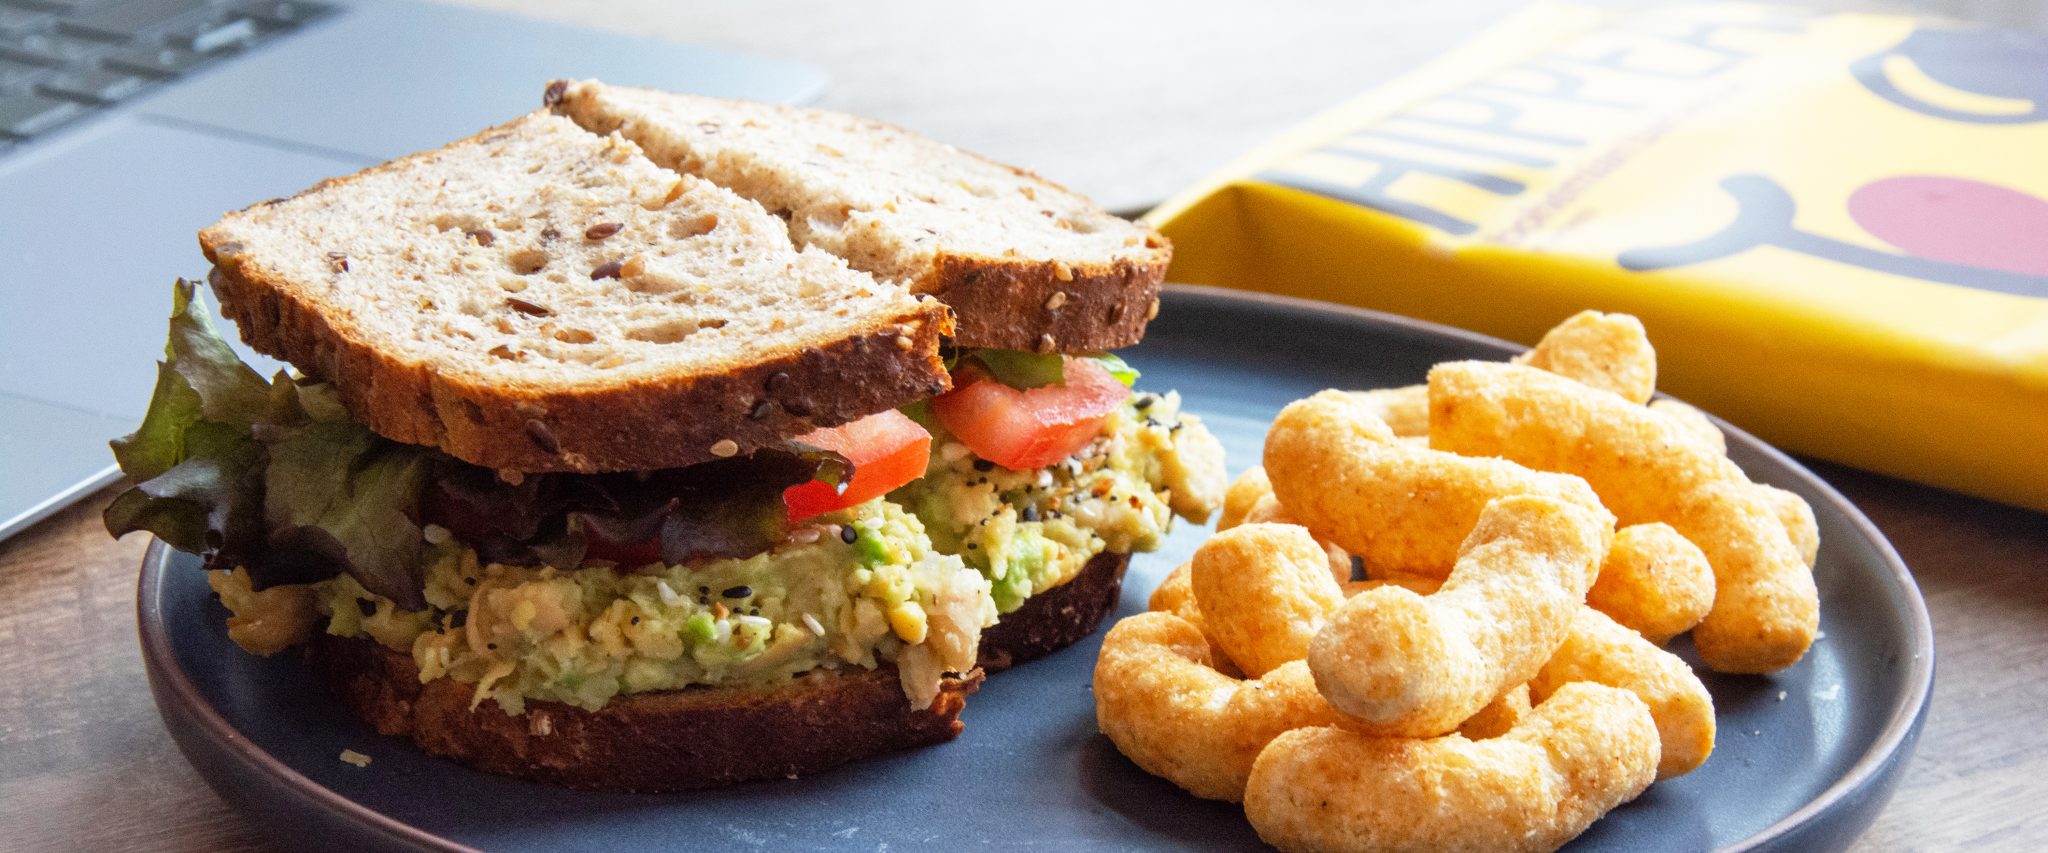 Avocado Chickpea Salad Sandwich with HIPPEAS® Organic Chickpea Puffs